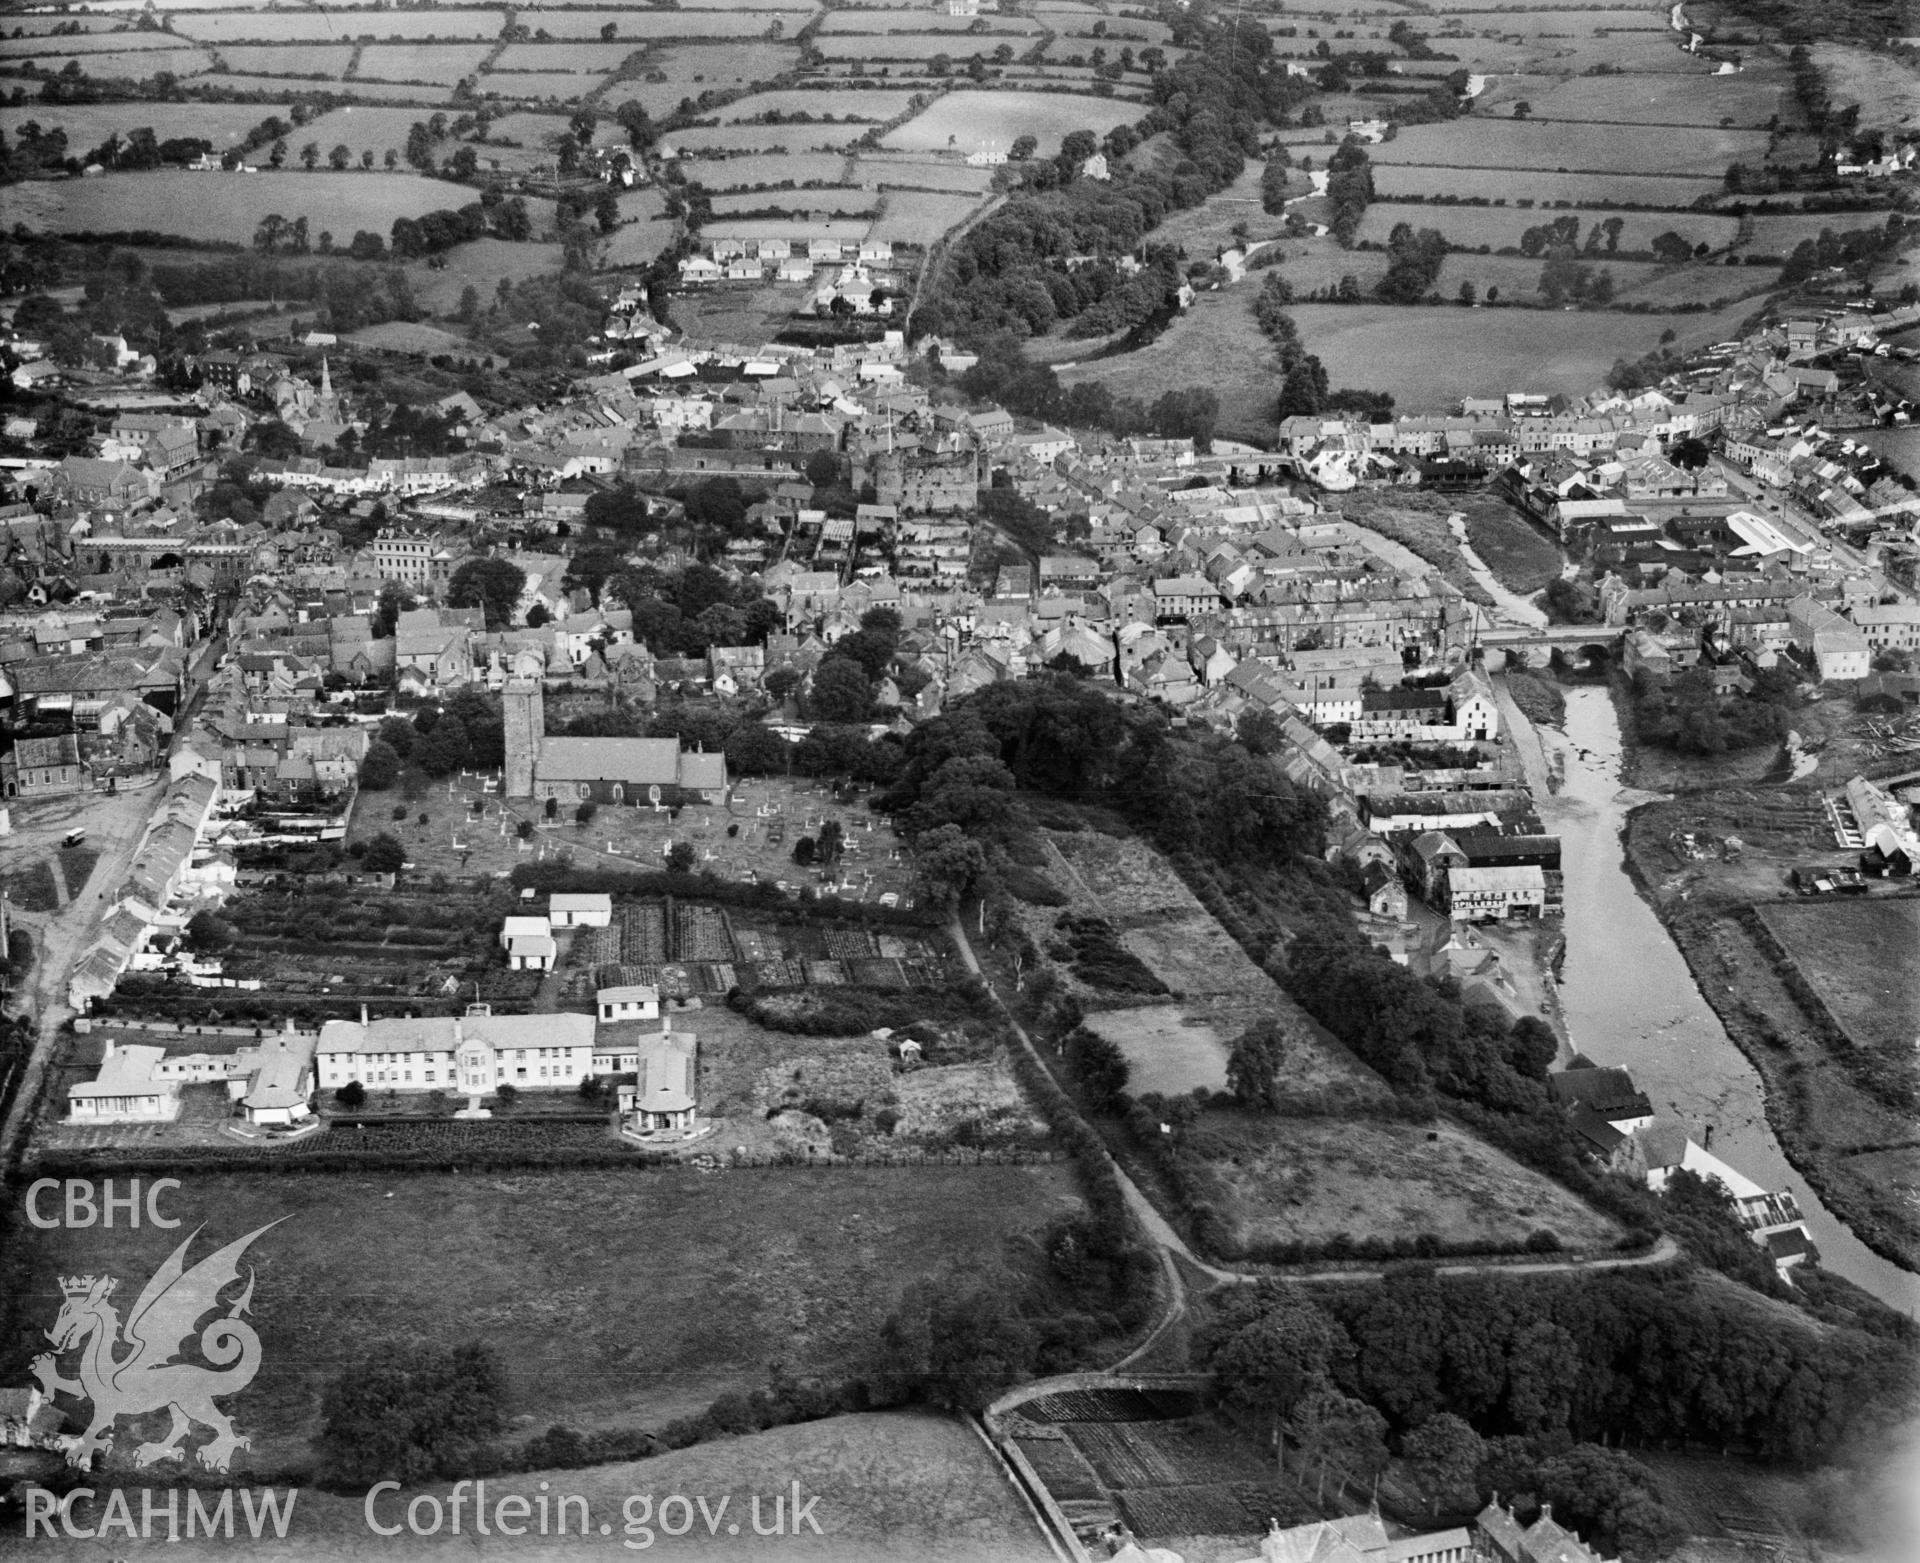 General view of Haverfordwest, showing hospital, oblique aerial view. 5?x4? black and white glass plate negative.